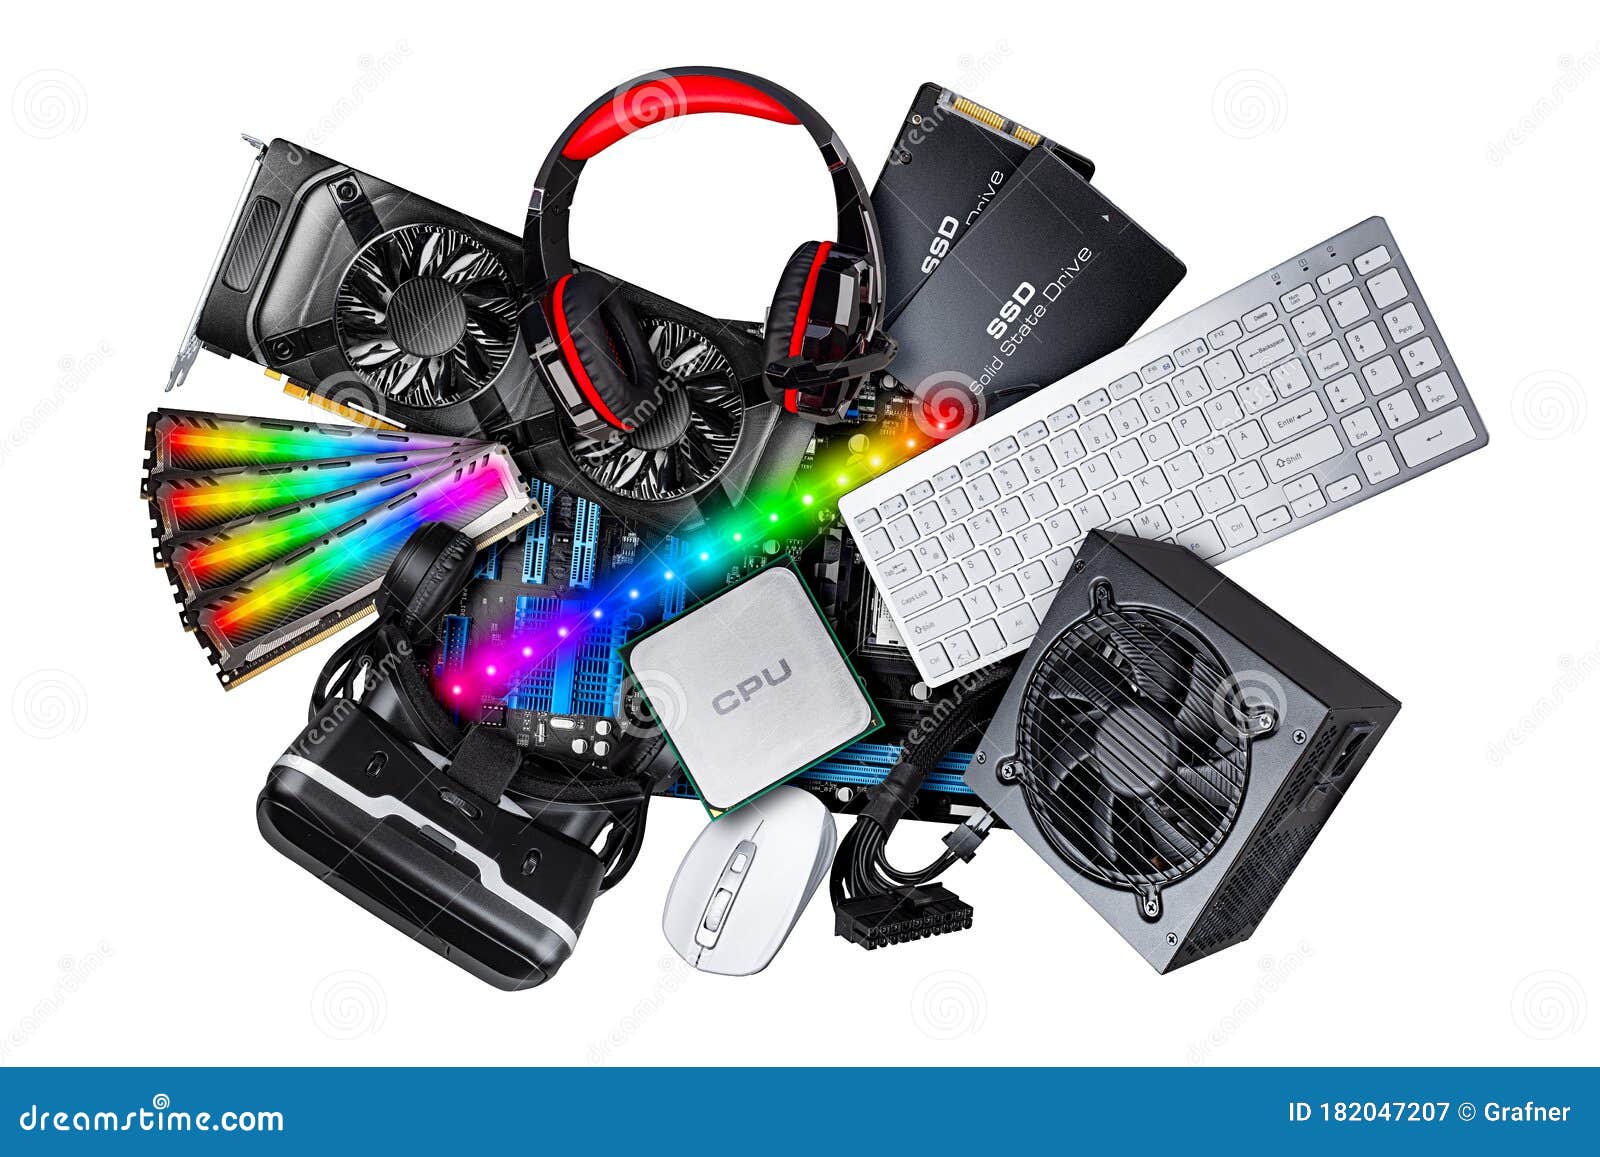 pc computer hardware components electronics collage. cpu micro processor graphics card power supply ddr ram headset vr glasses